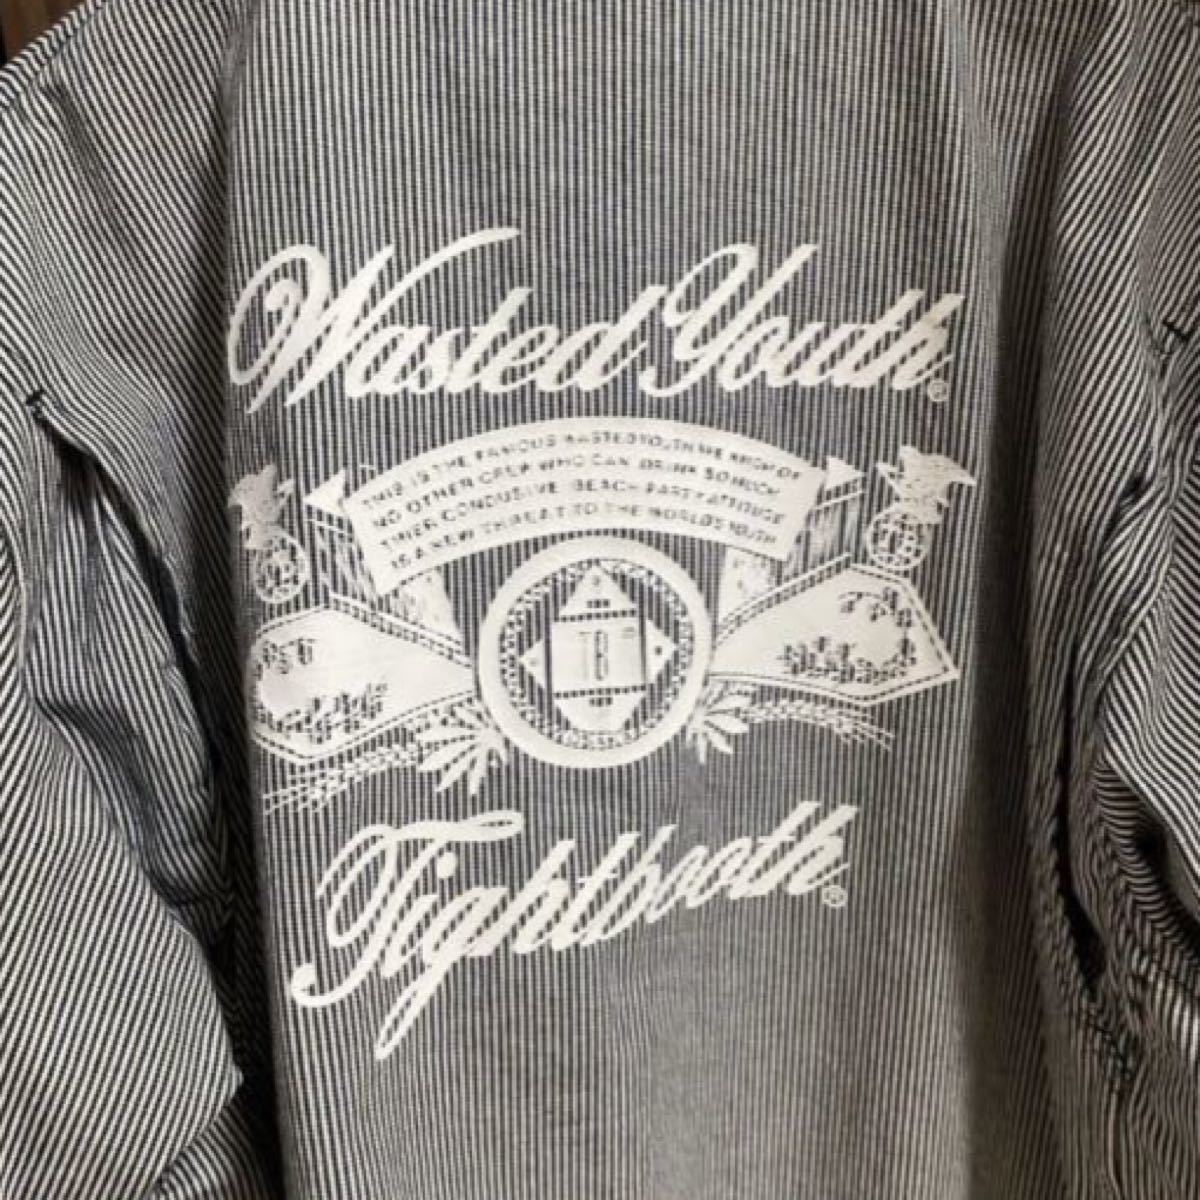 WASTED YOUTH TIGHTBOOTH T-65 HICORY JKT - library.iainponorogo.ac.id